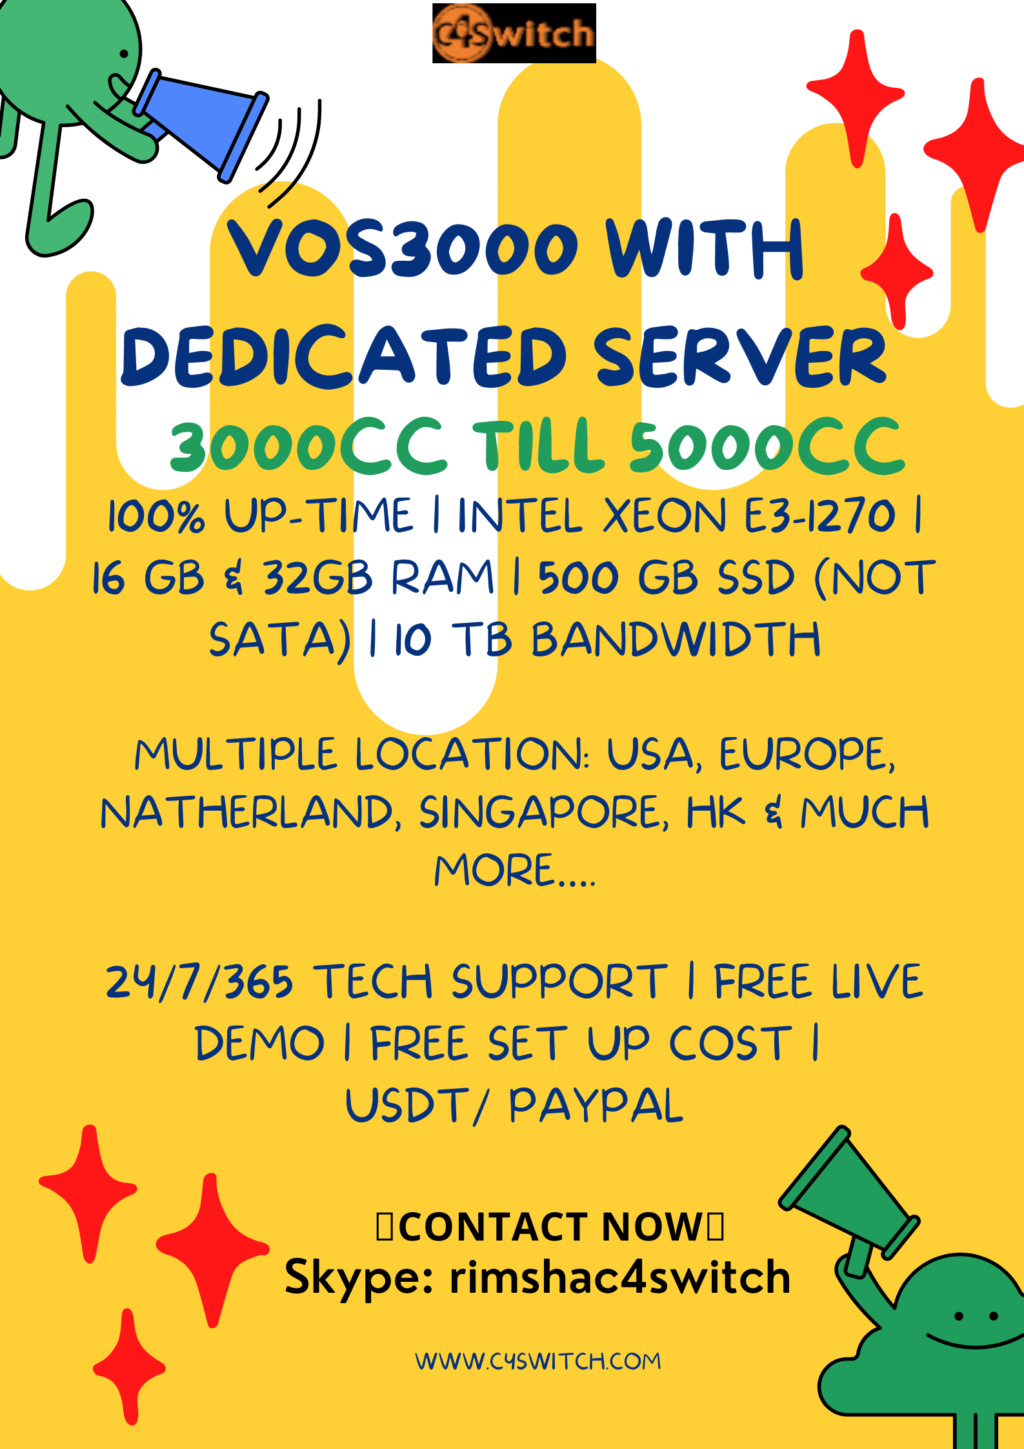 VOS3000 with DEDICATED SERVERS & MULTIPLE CO LOCATIONS.. Vos30016